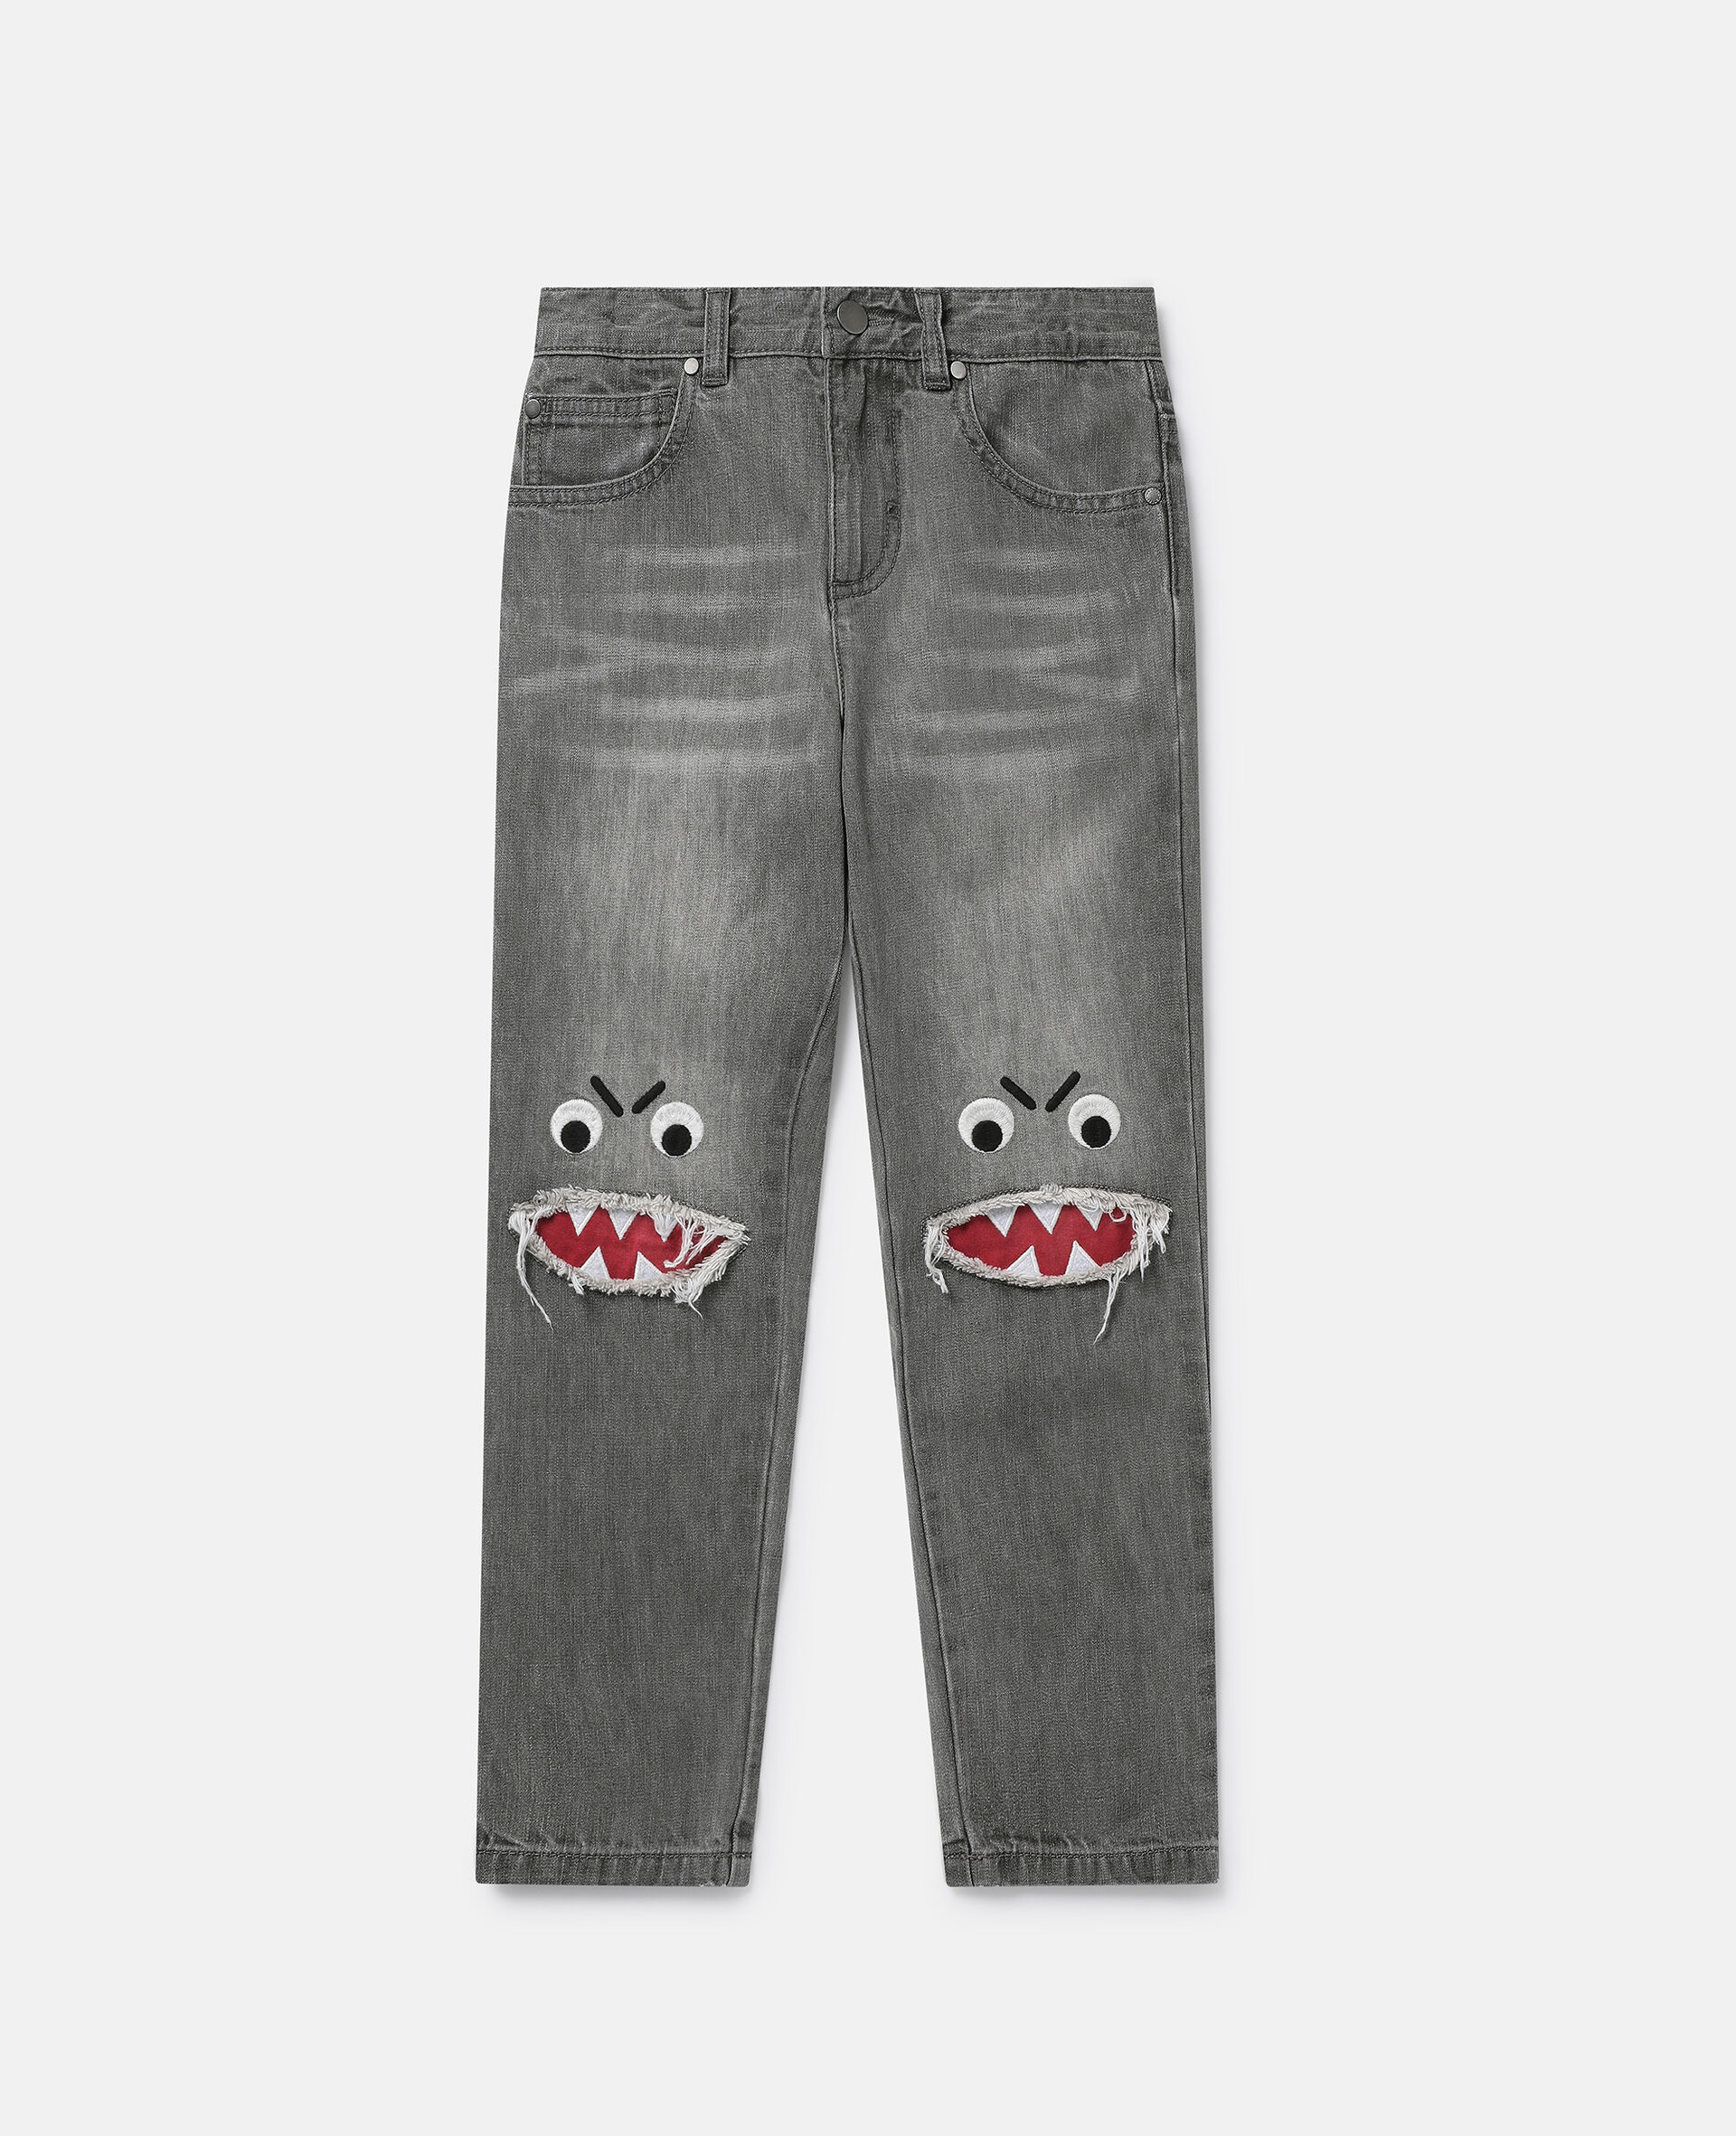 Shark Face Ripped Skinny Jeans-灰色-large image number 0